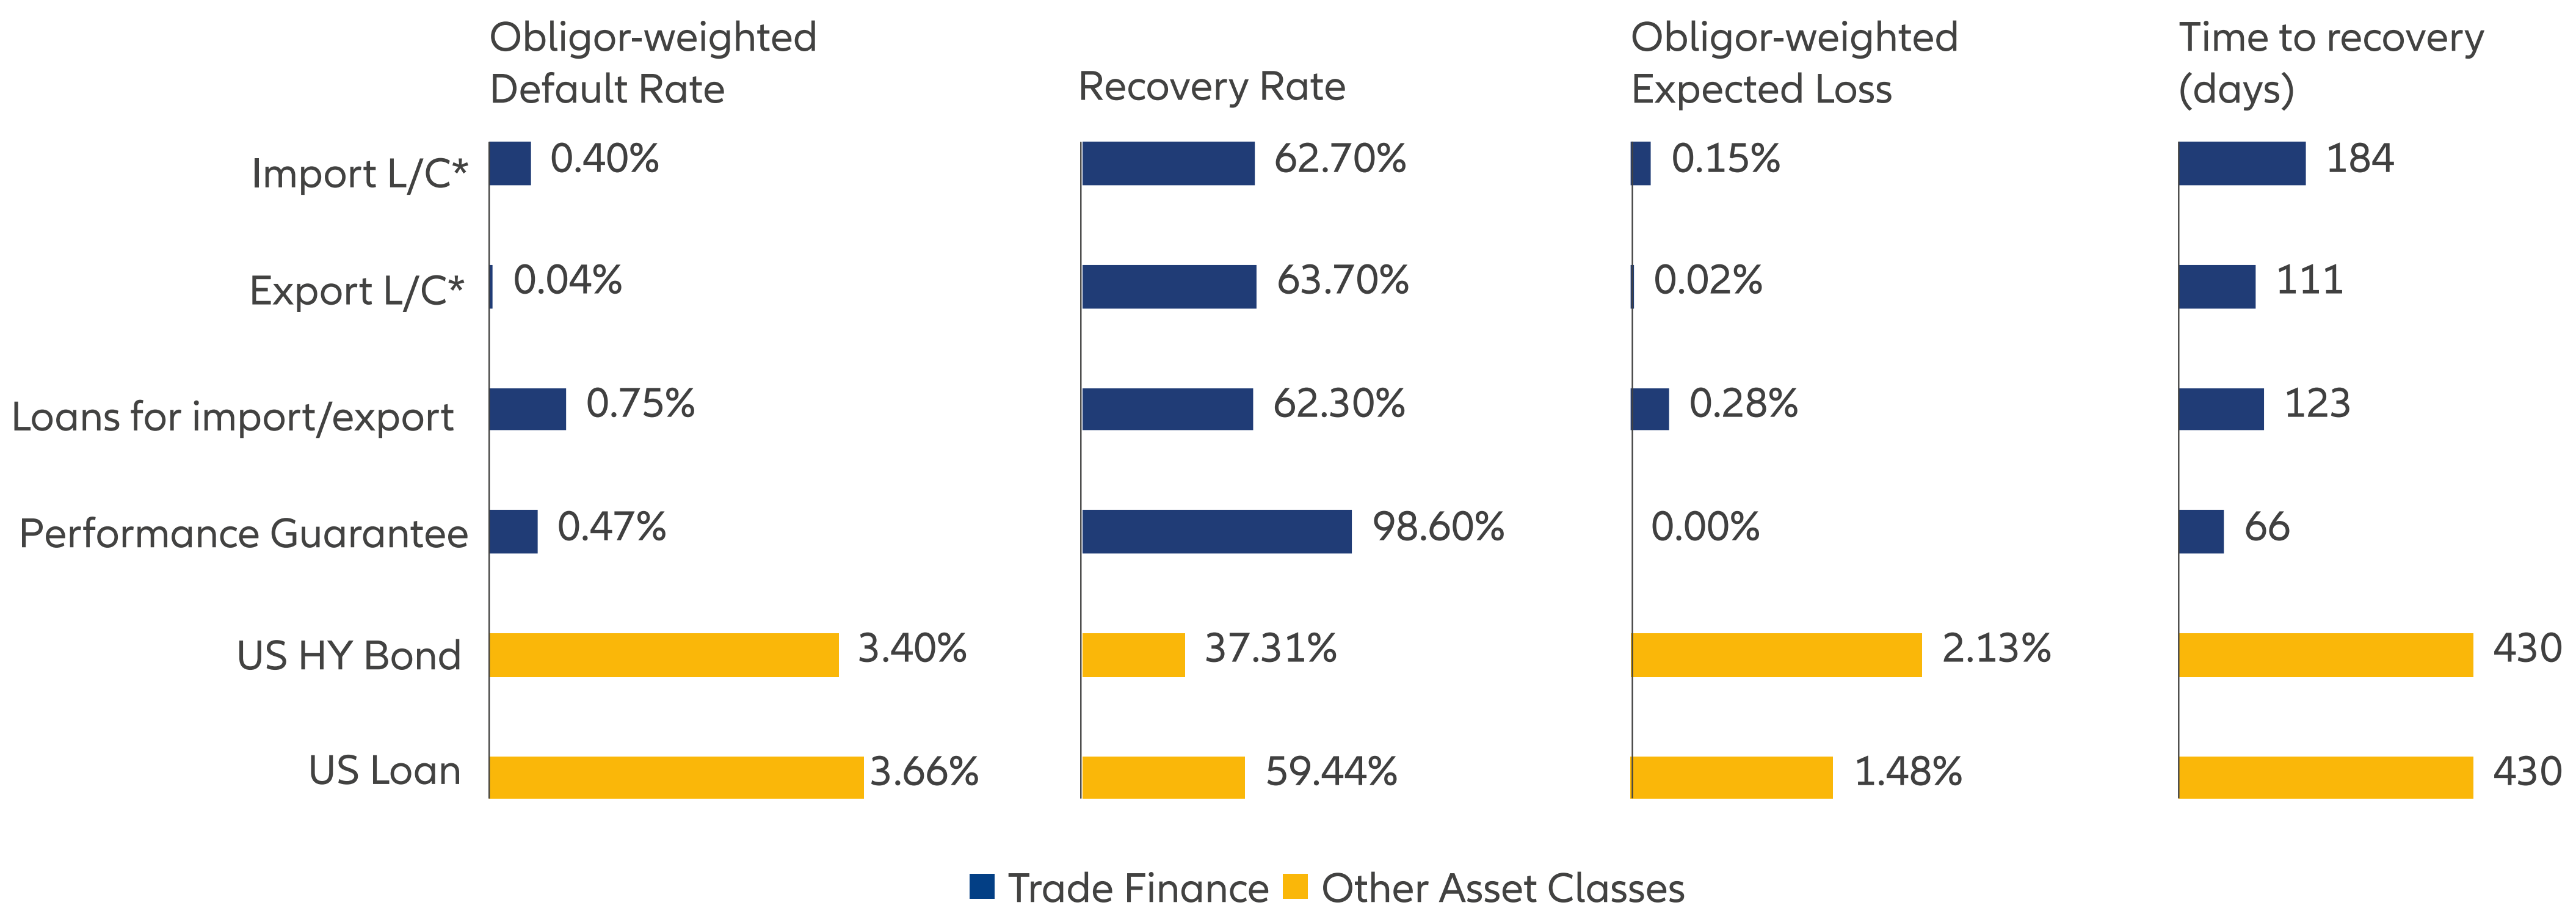 Exhibit 2: Trade finance tends to have lower default rates and higher recovery rates than public credit